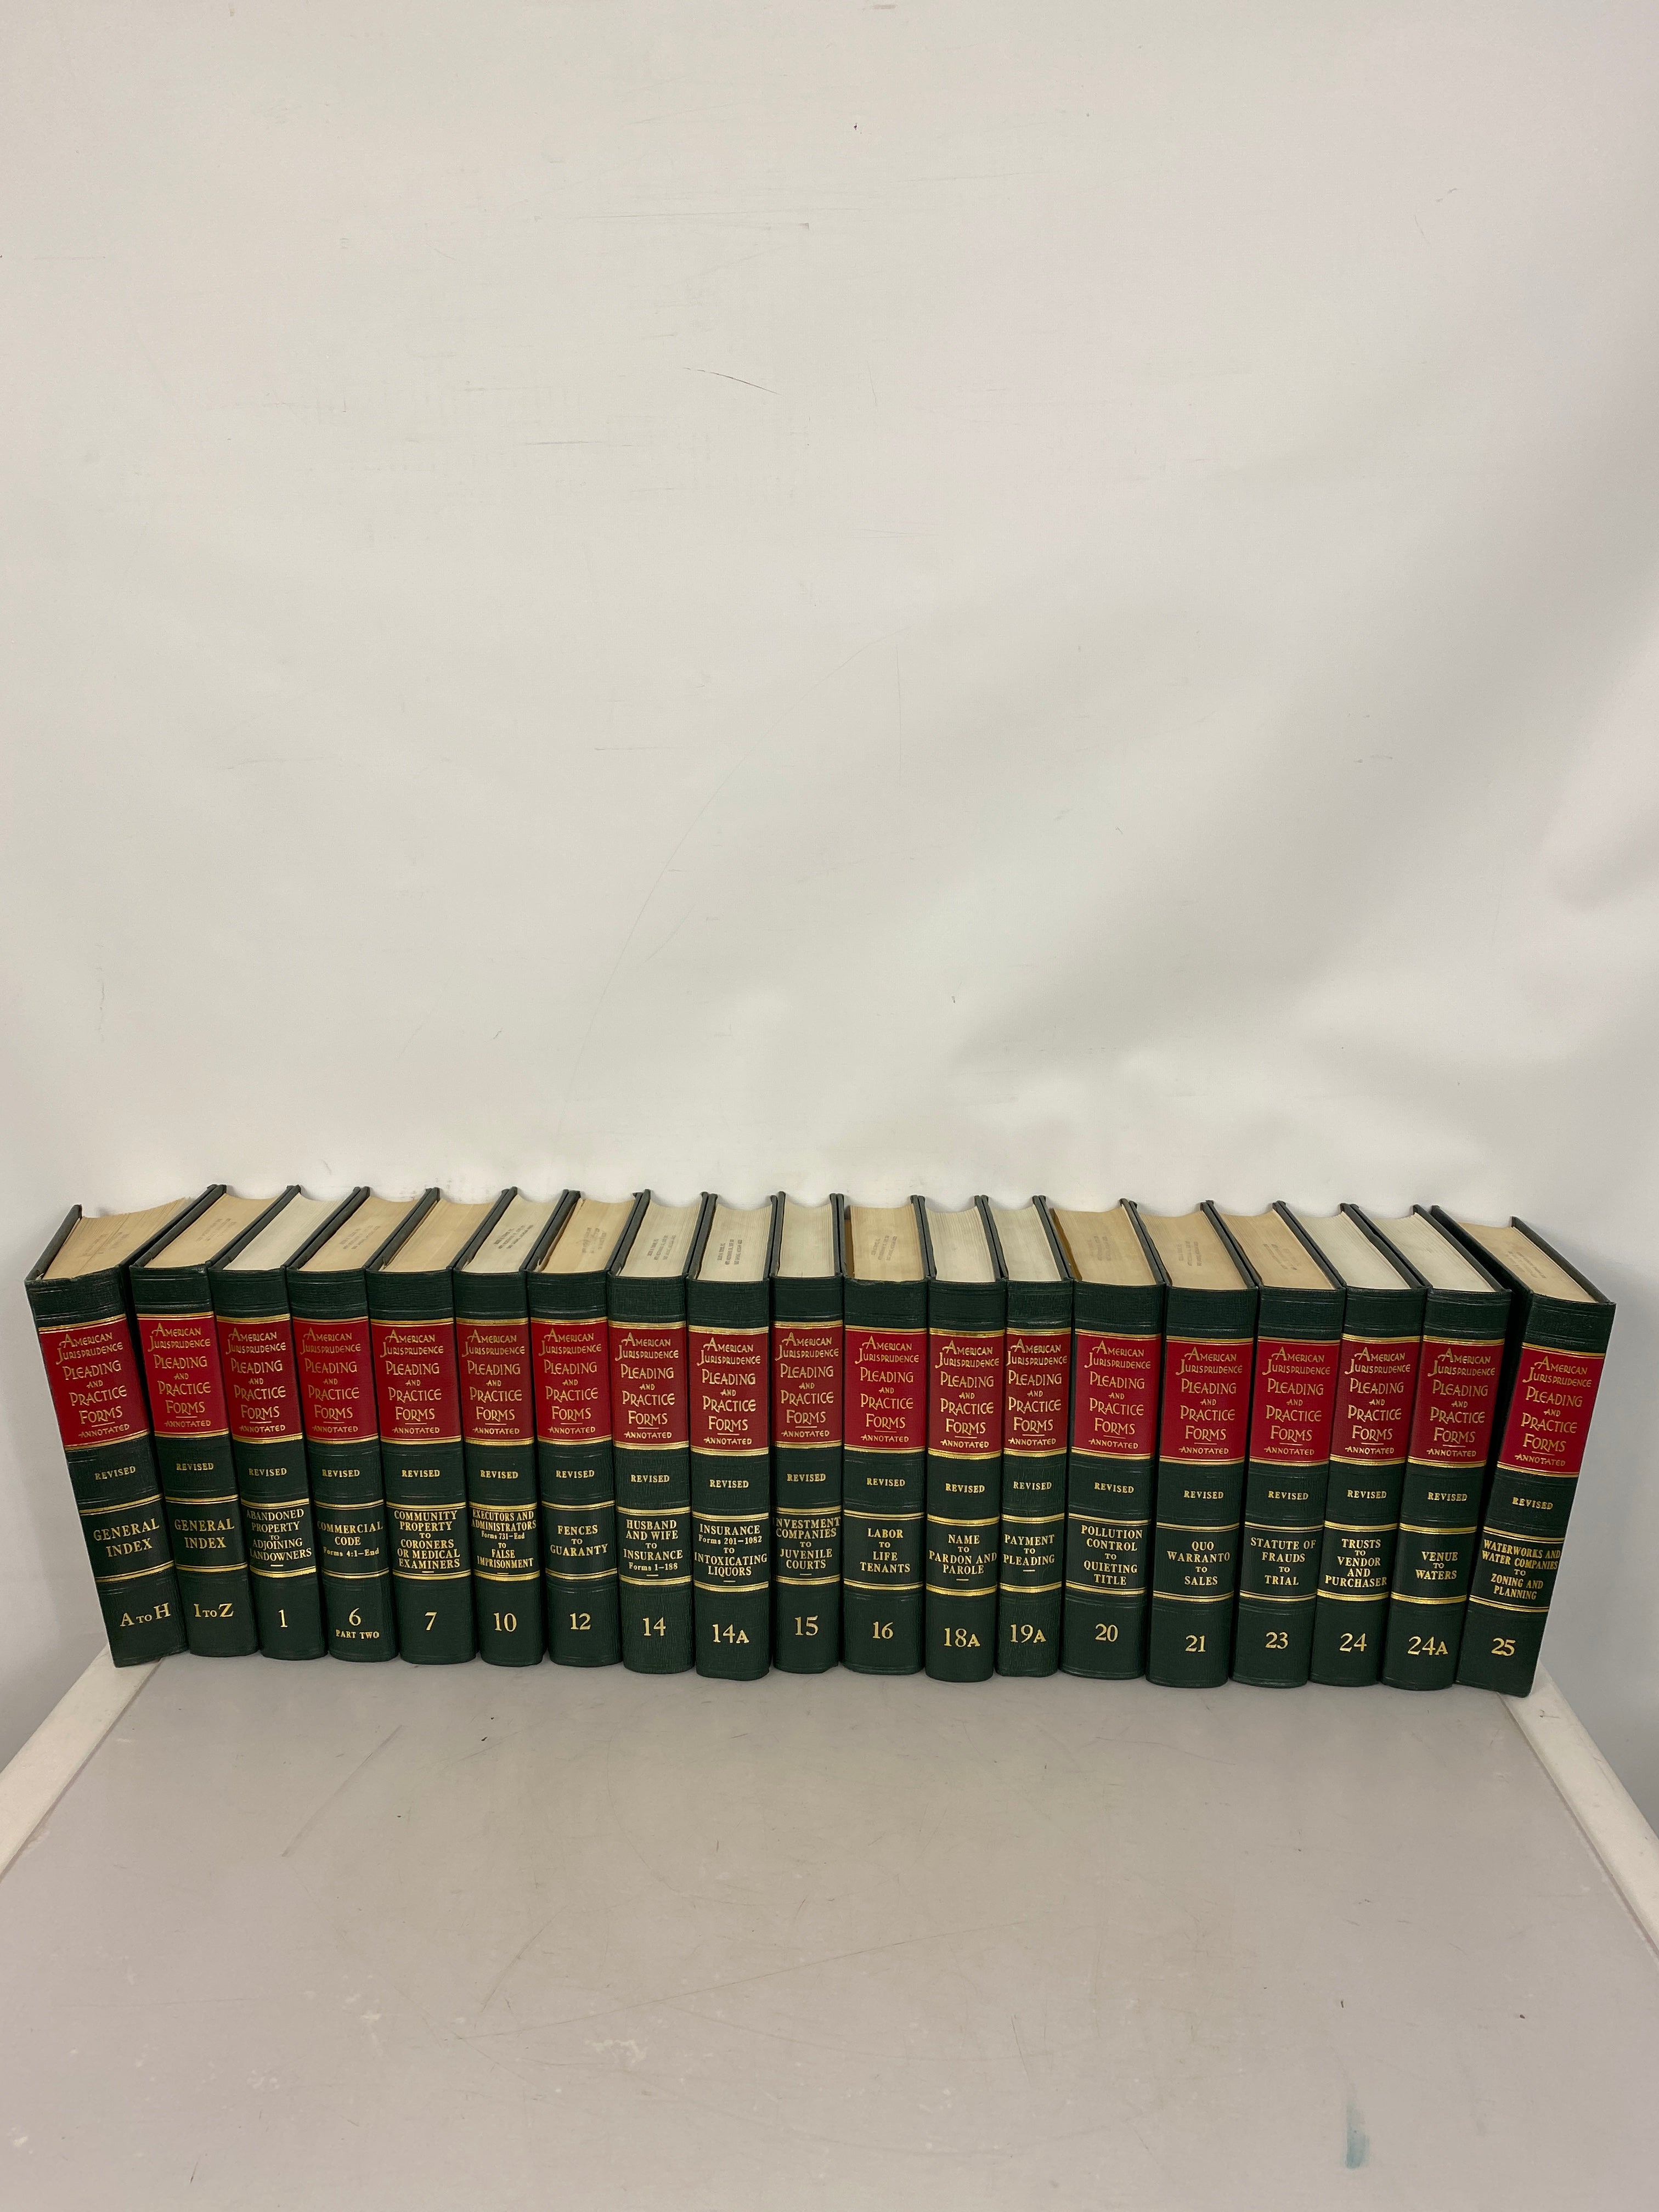 American Jurisprudence Pleading and Practice Forms 21 Volumes w/Index